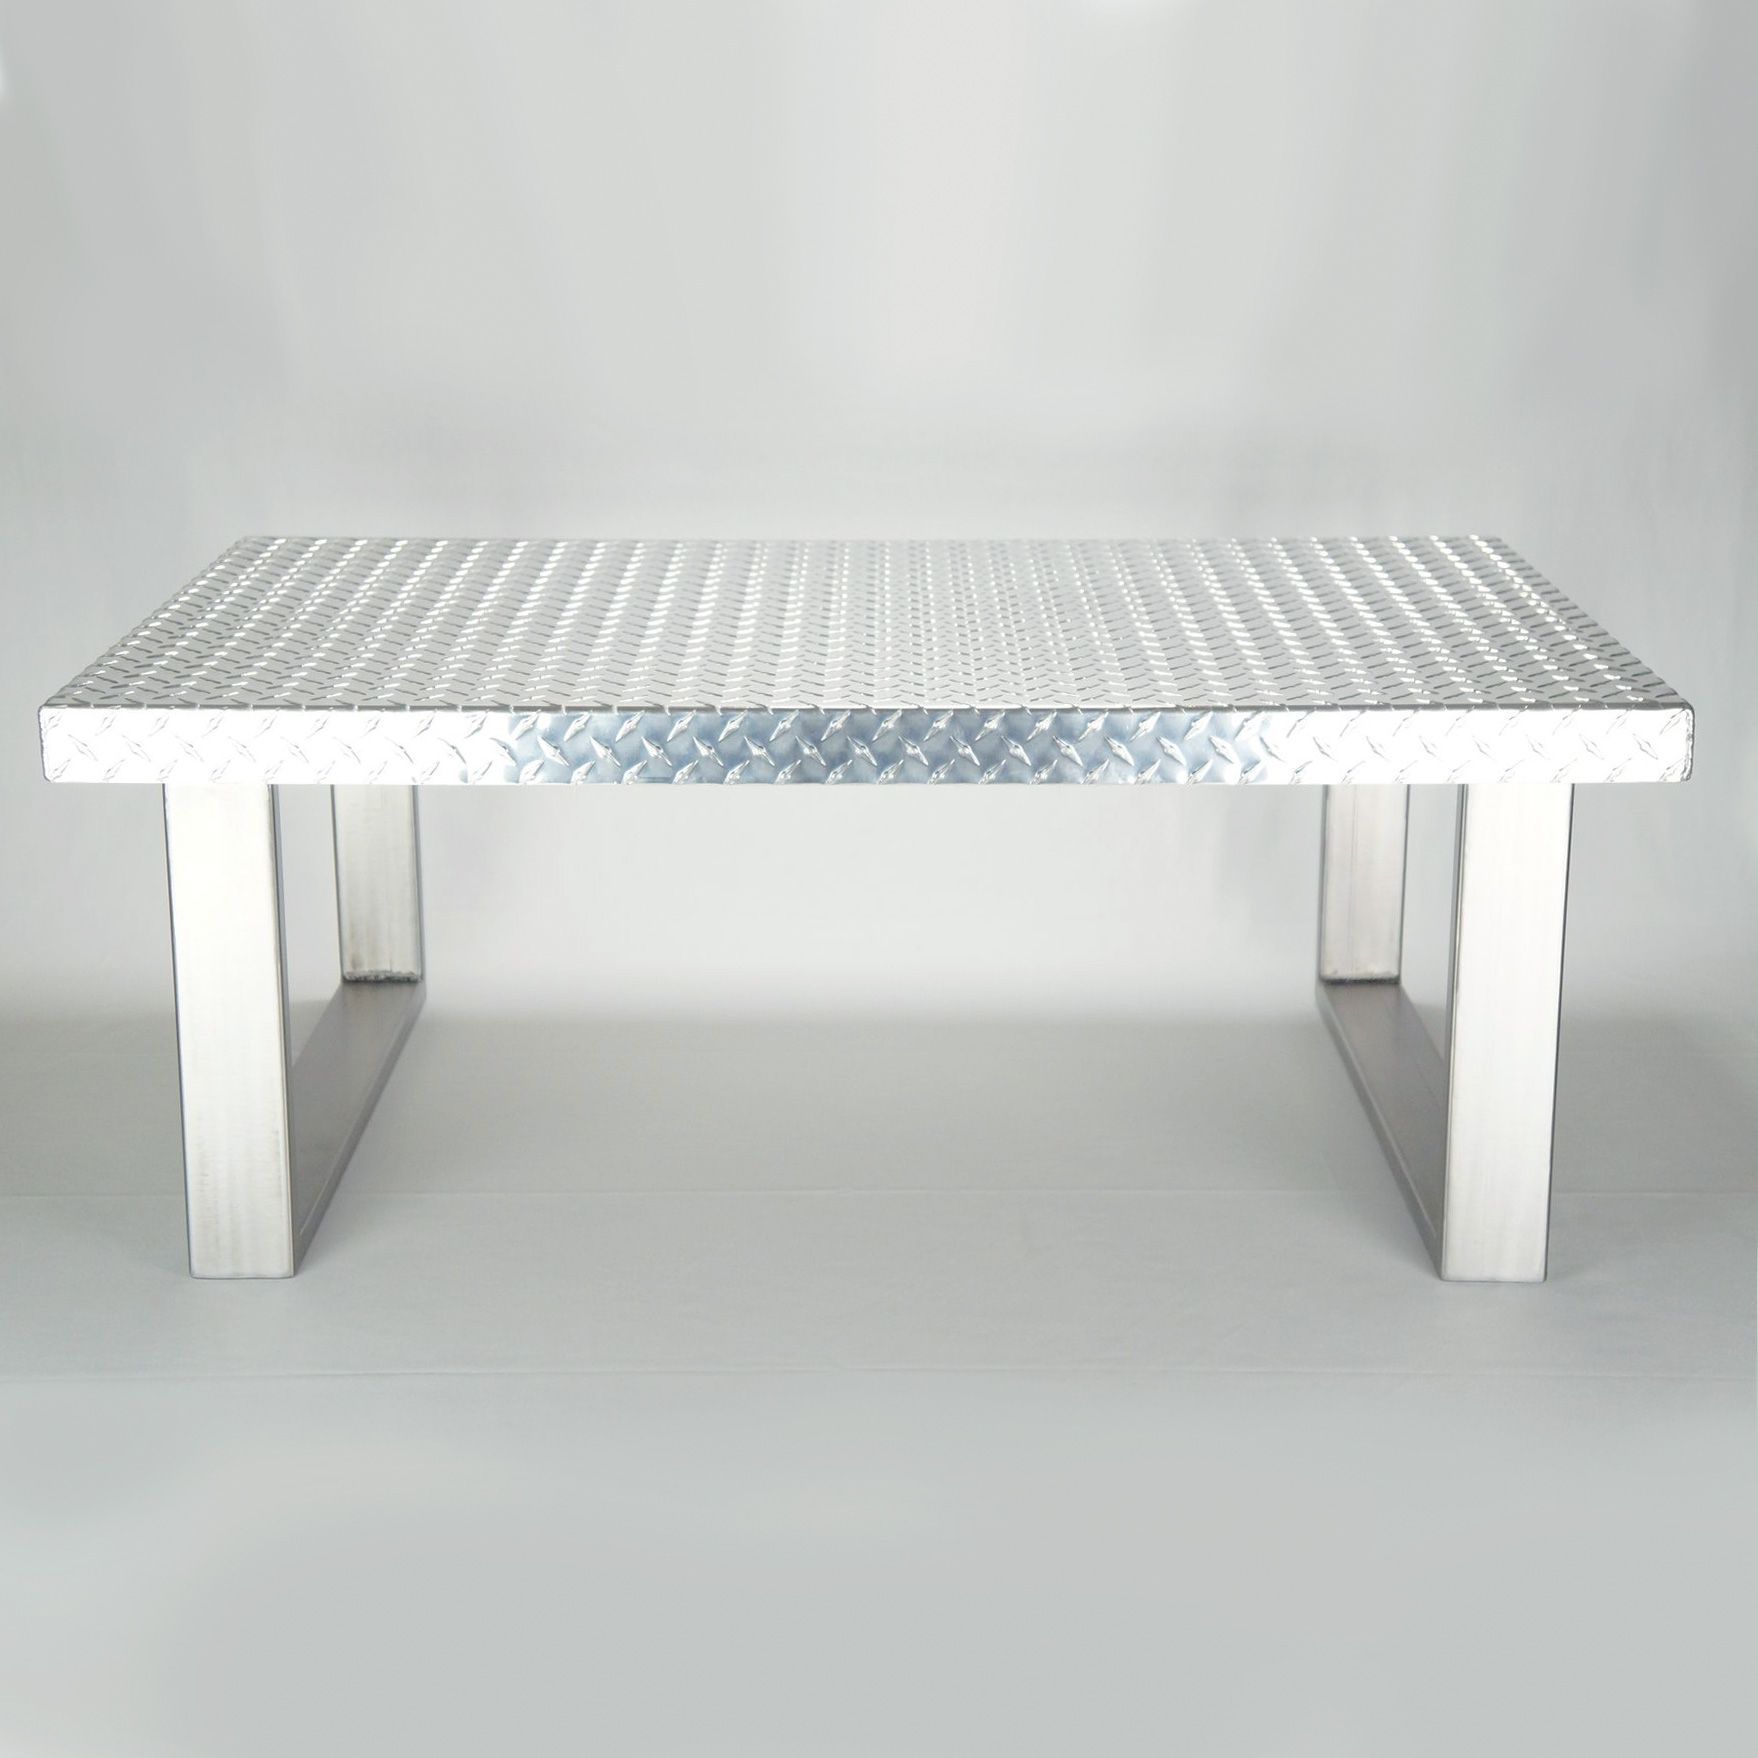 Hand Made Industrial Diamond Plate Metal Coffee Table Regarding Brown Wood And Steel Plate Coffee Tables (View 10 of 15)